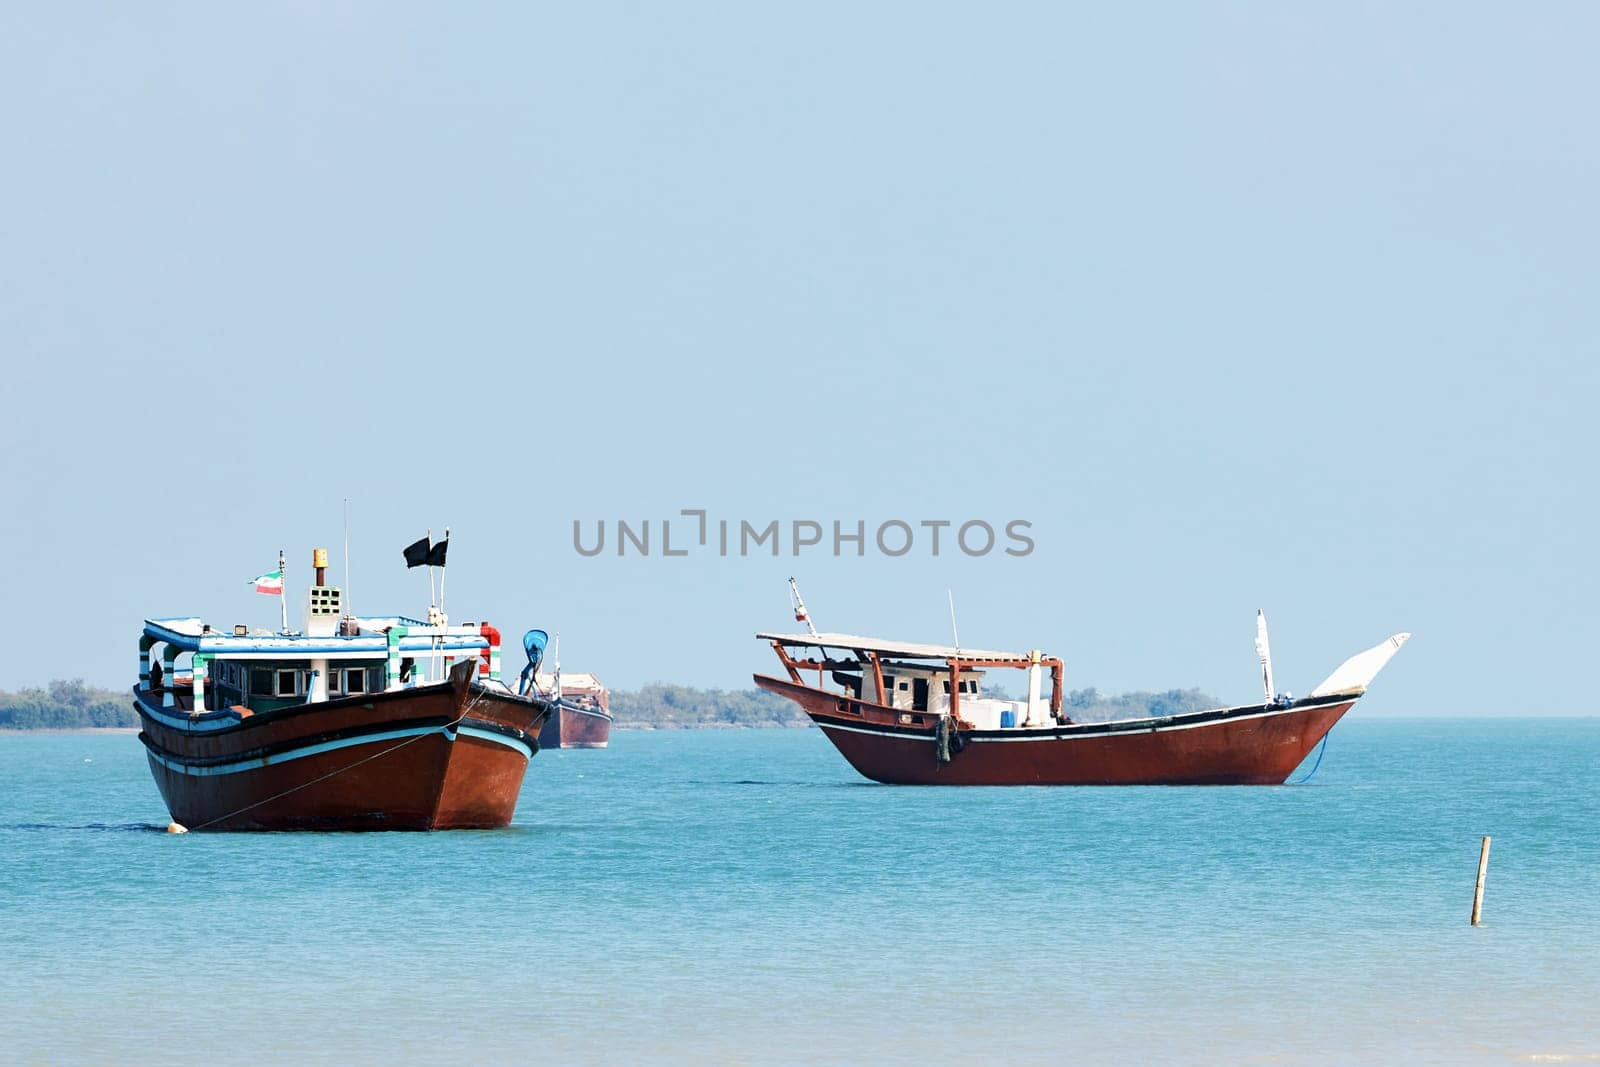 Traditional Dhow old wooden boat in the harbor of Iranian Qeshm Island. Tradition Lenj Fishing Boat in Qeshm Island in Southern Iran. Old wooden stealth smuggler's ship.